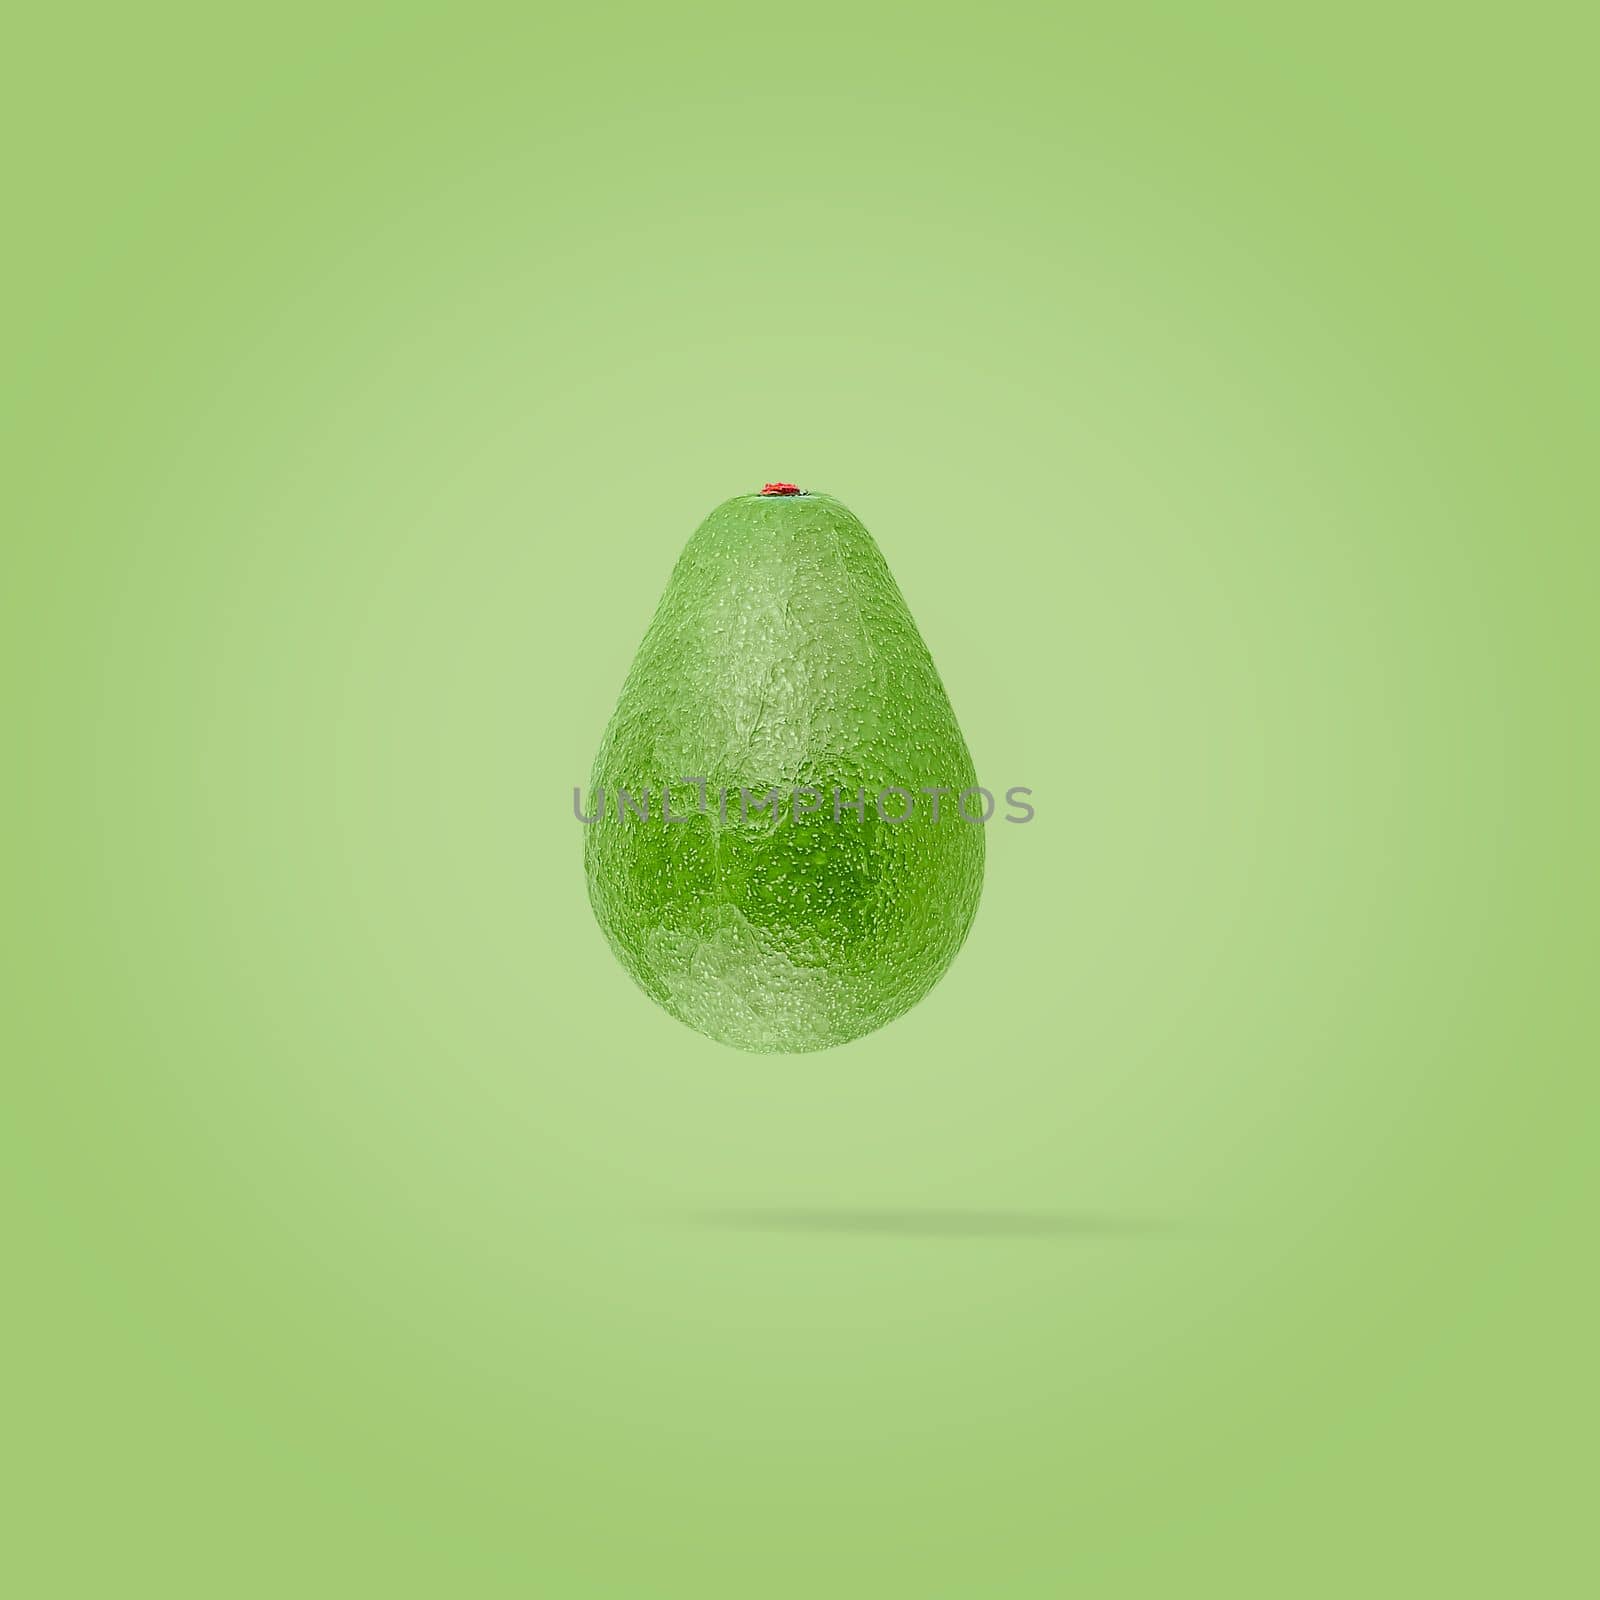 Minimal fruit concept. One whole and ripe avocado on pastel green background.